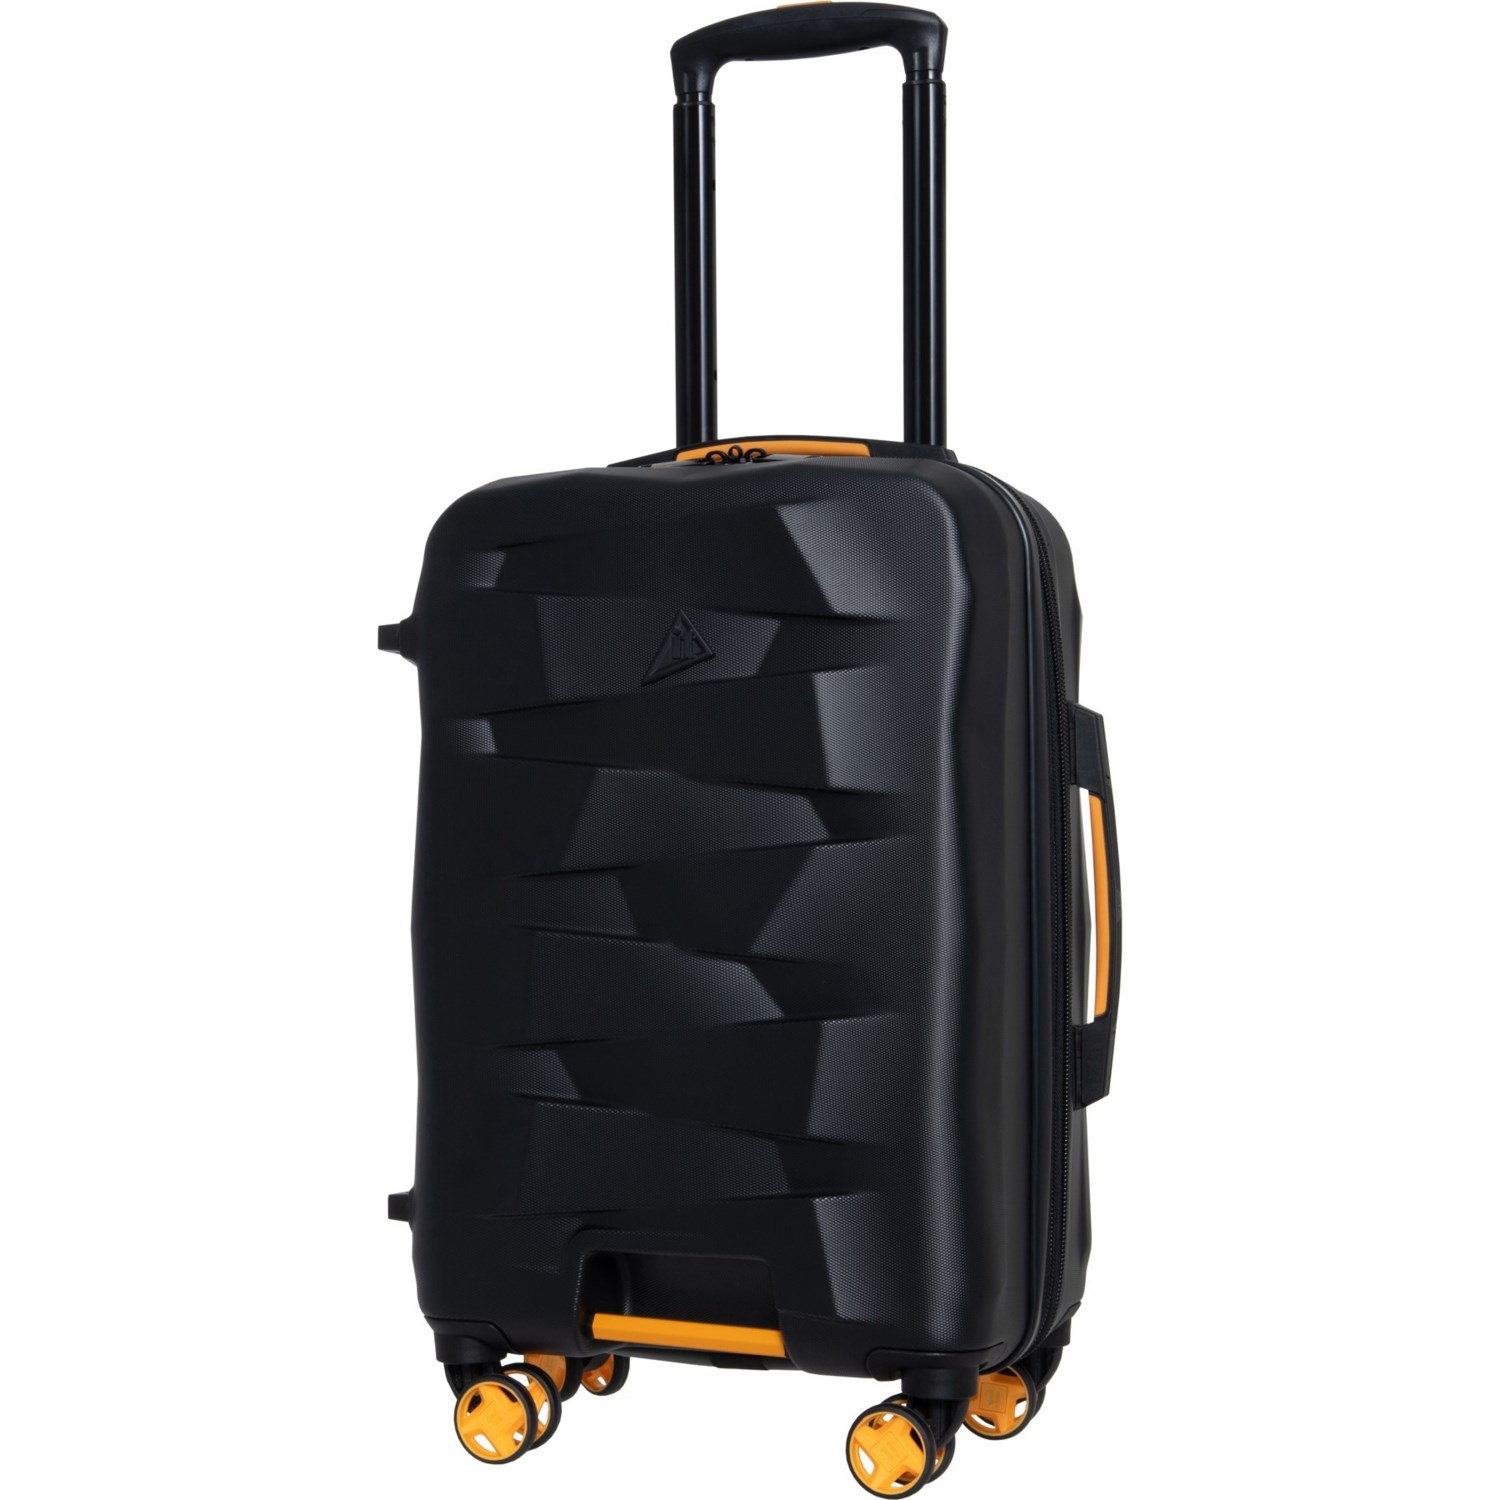 BritBag 21” Elevate Carry-On Spinner Suitcase - Hardside, Expandable, Black